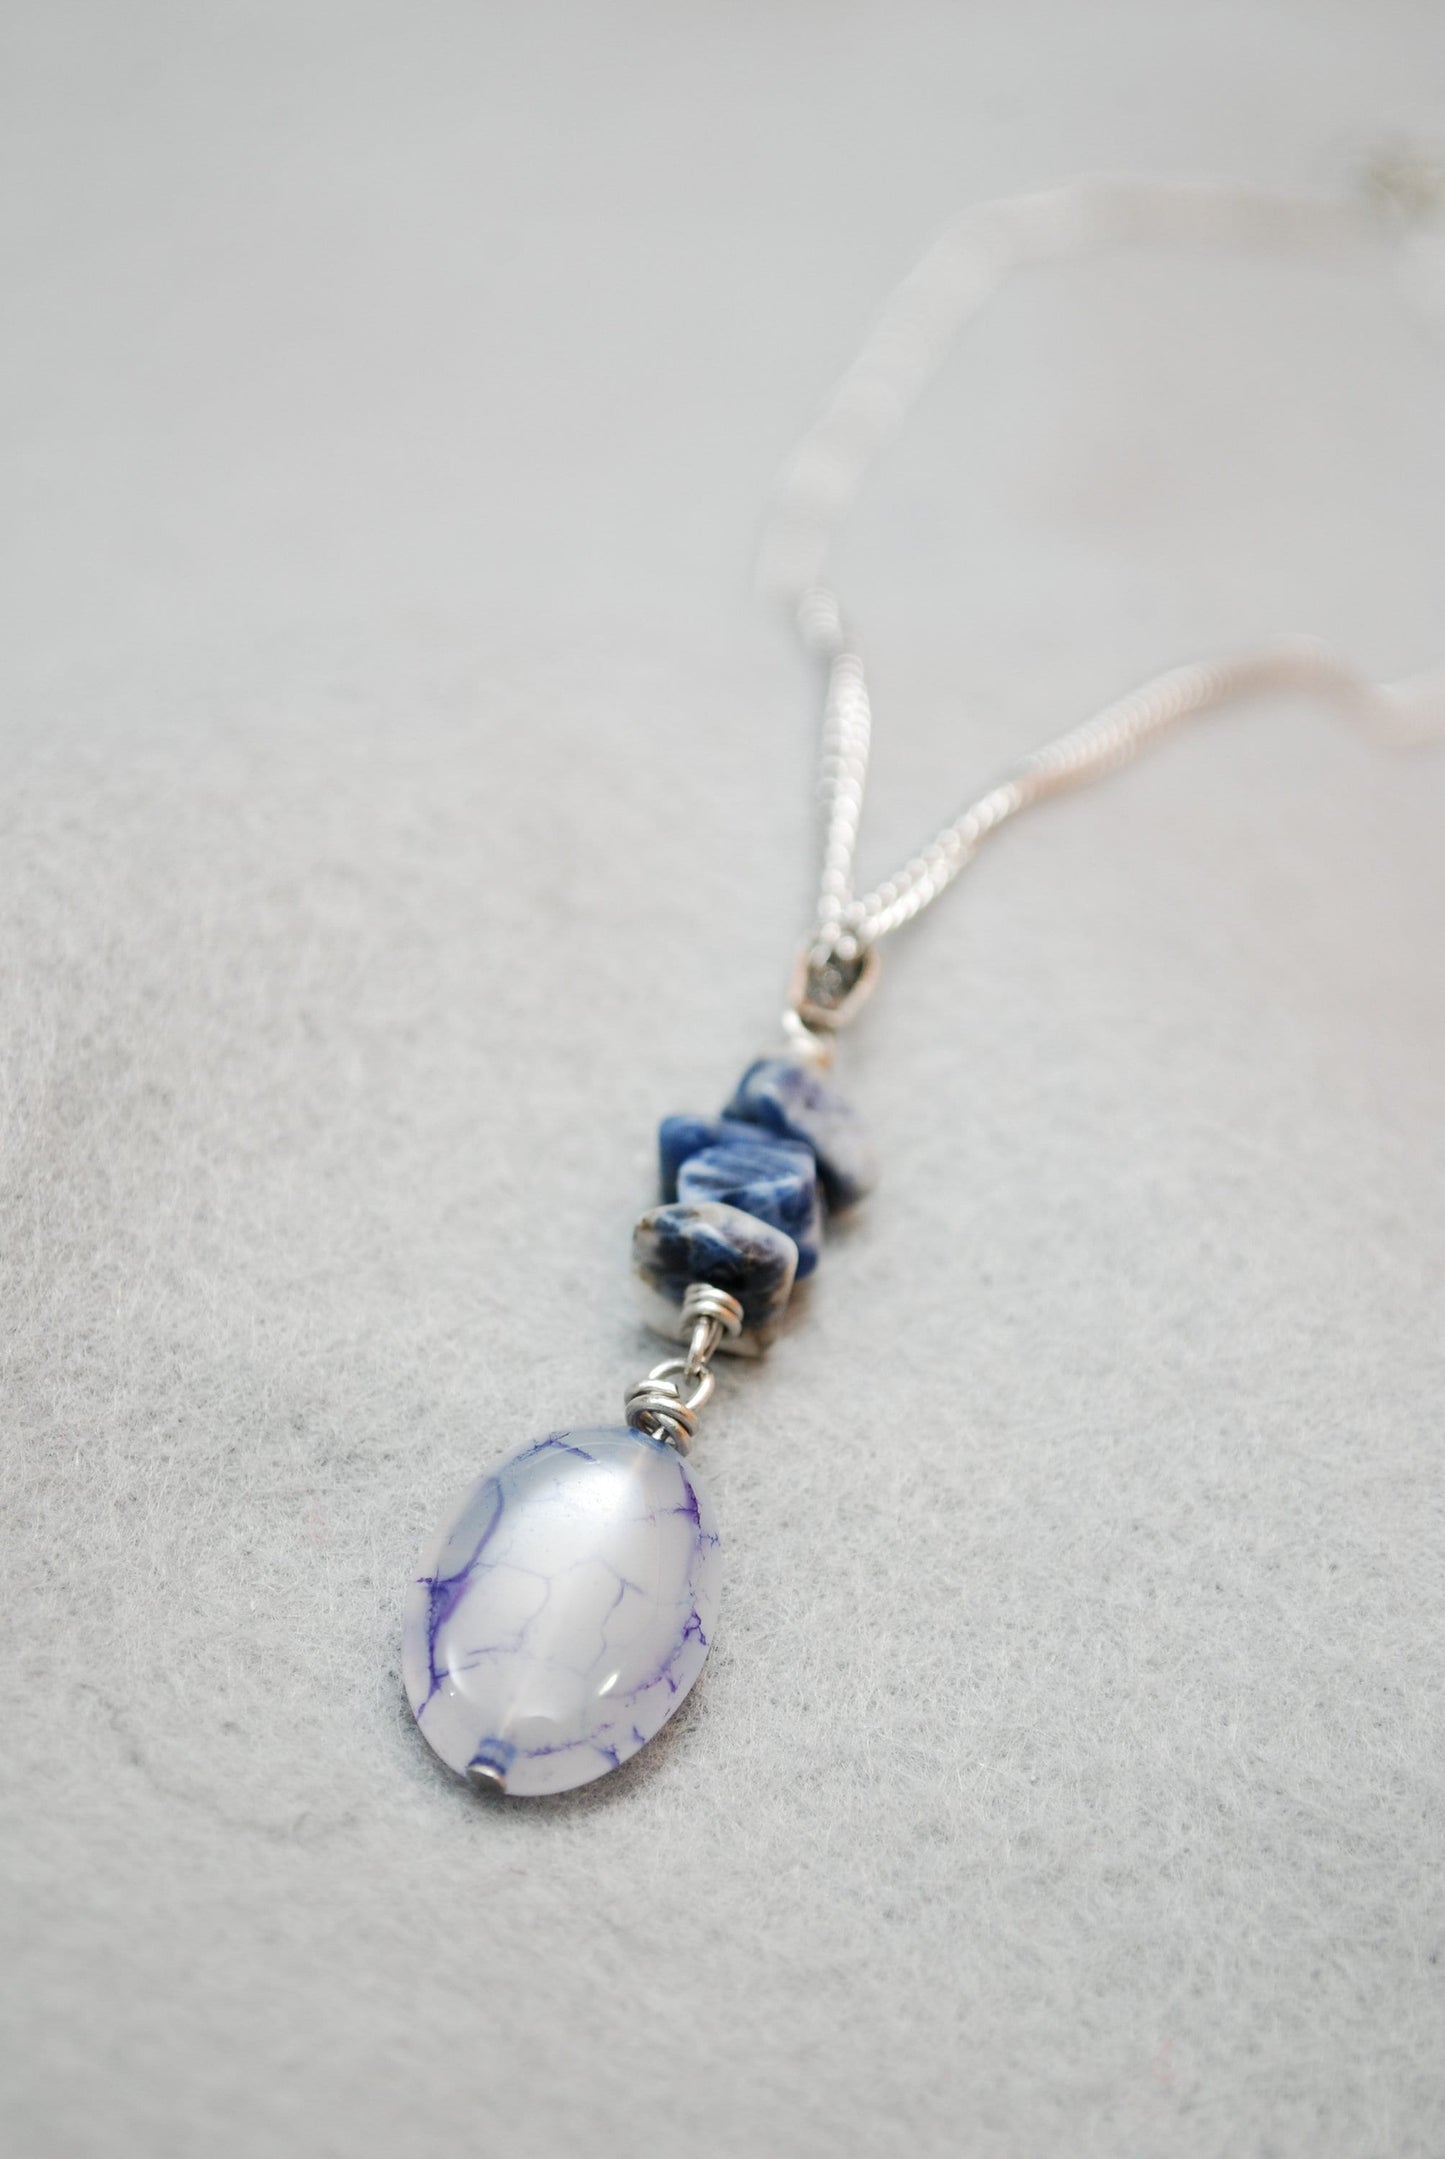 Lapis lazuli and dragon agate necklace, stainless steel necklace with gemstone accents, Estibela design, Elegant pendant for women